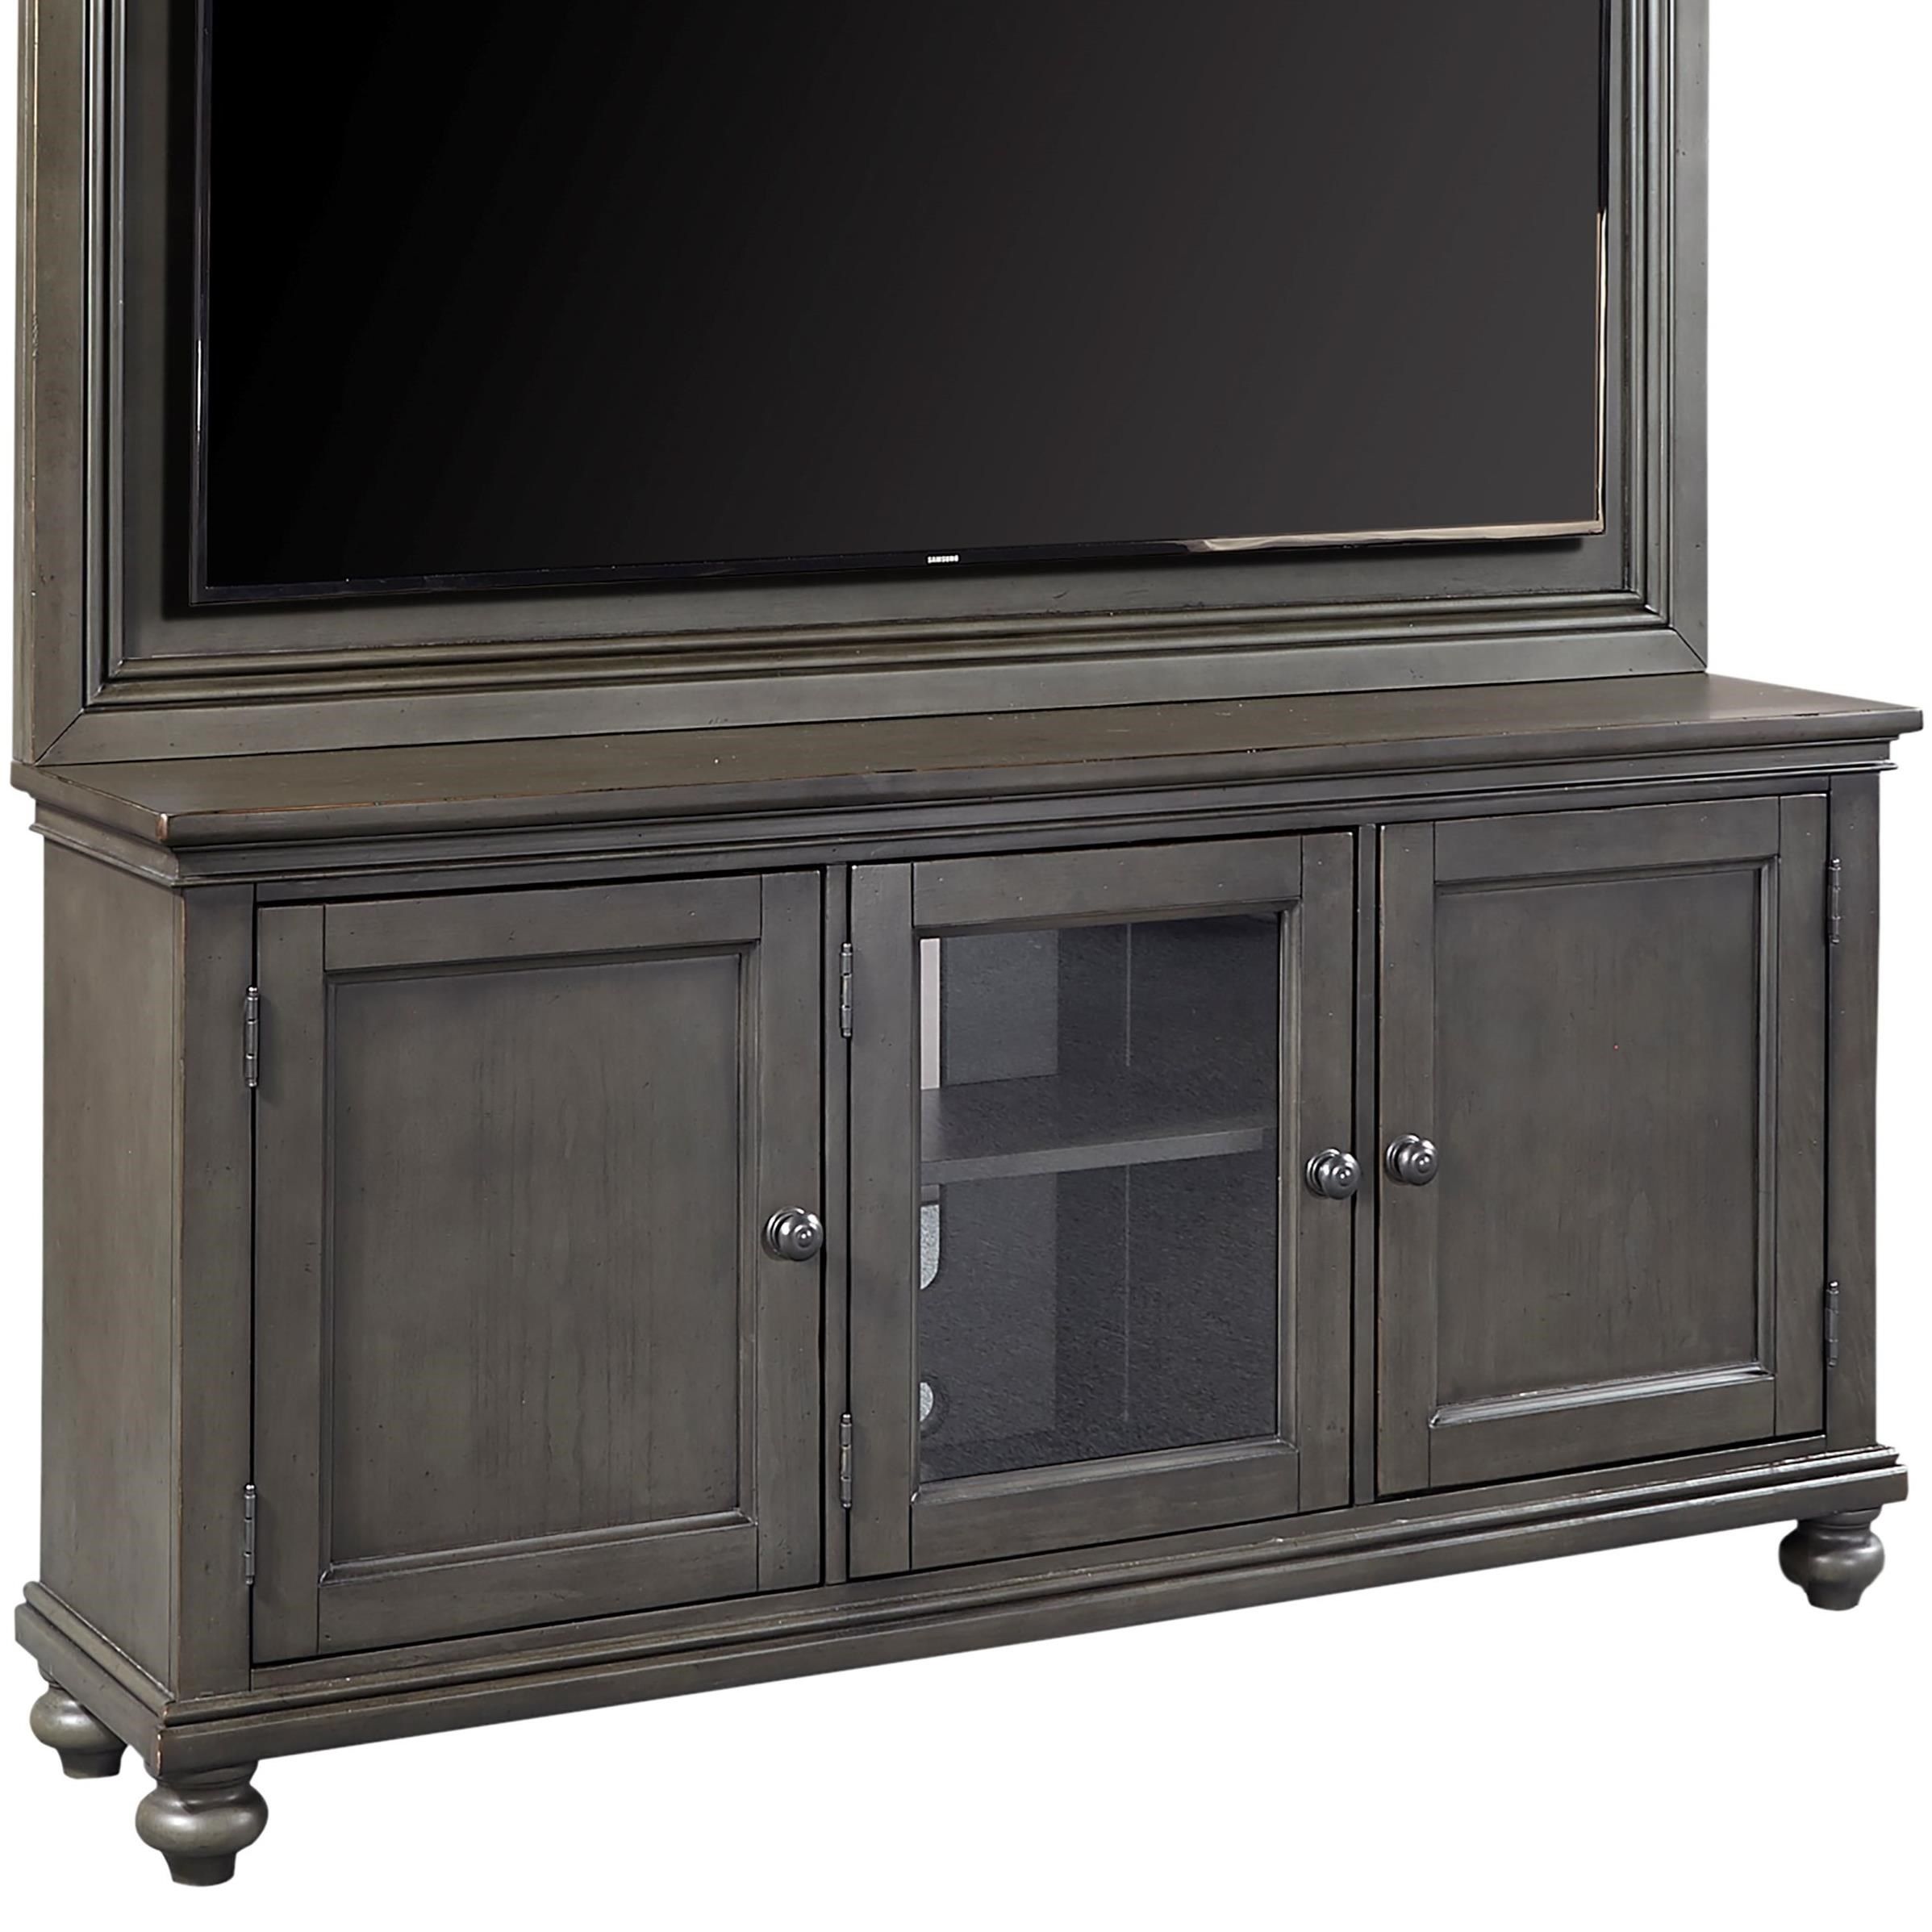 Aspenhome Oxford 65" Tv Stand With Adjustable Shelves | Stoney Creek With Regard To Oxford 84 Inch Tv Stands (View 3 of 30)